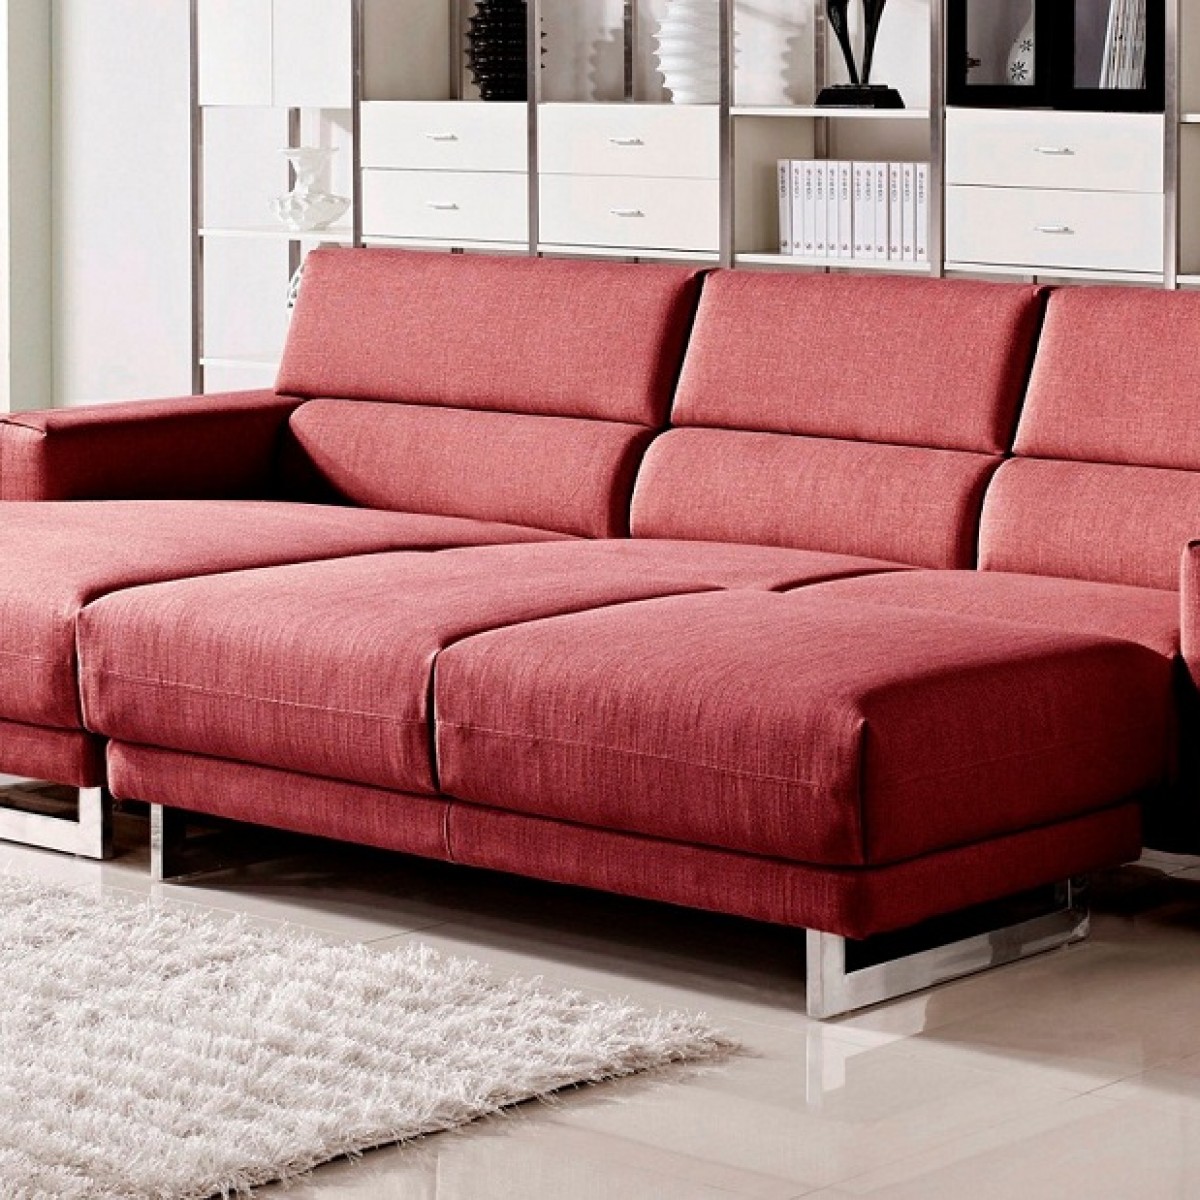 sectional sleeper sofa with chaise photo - 8